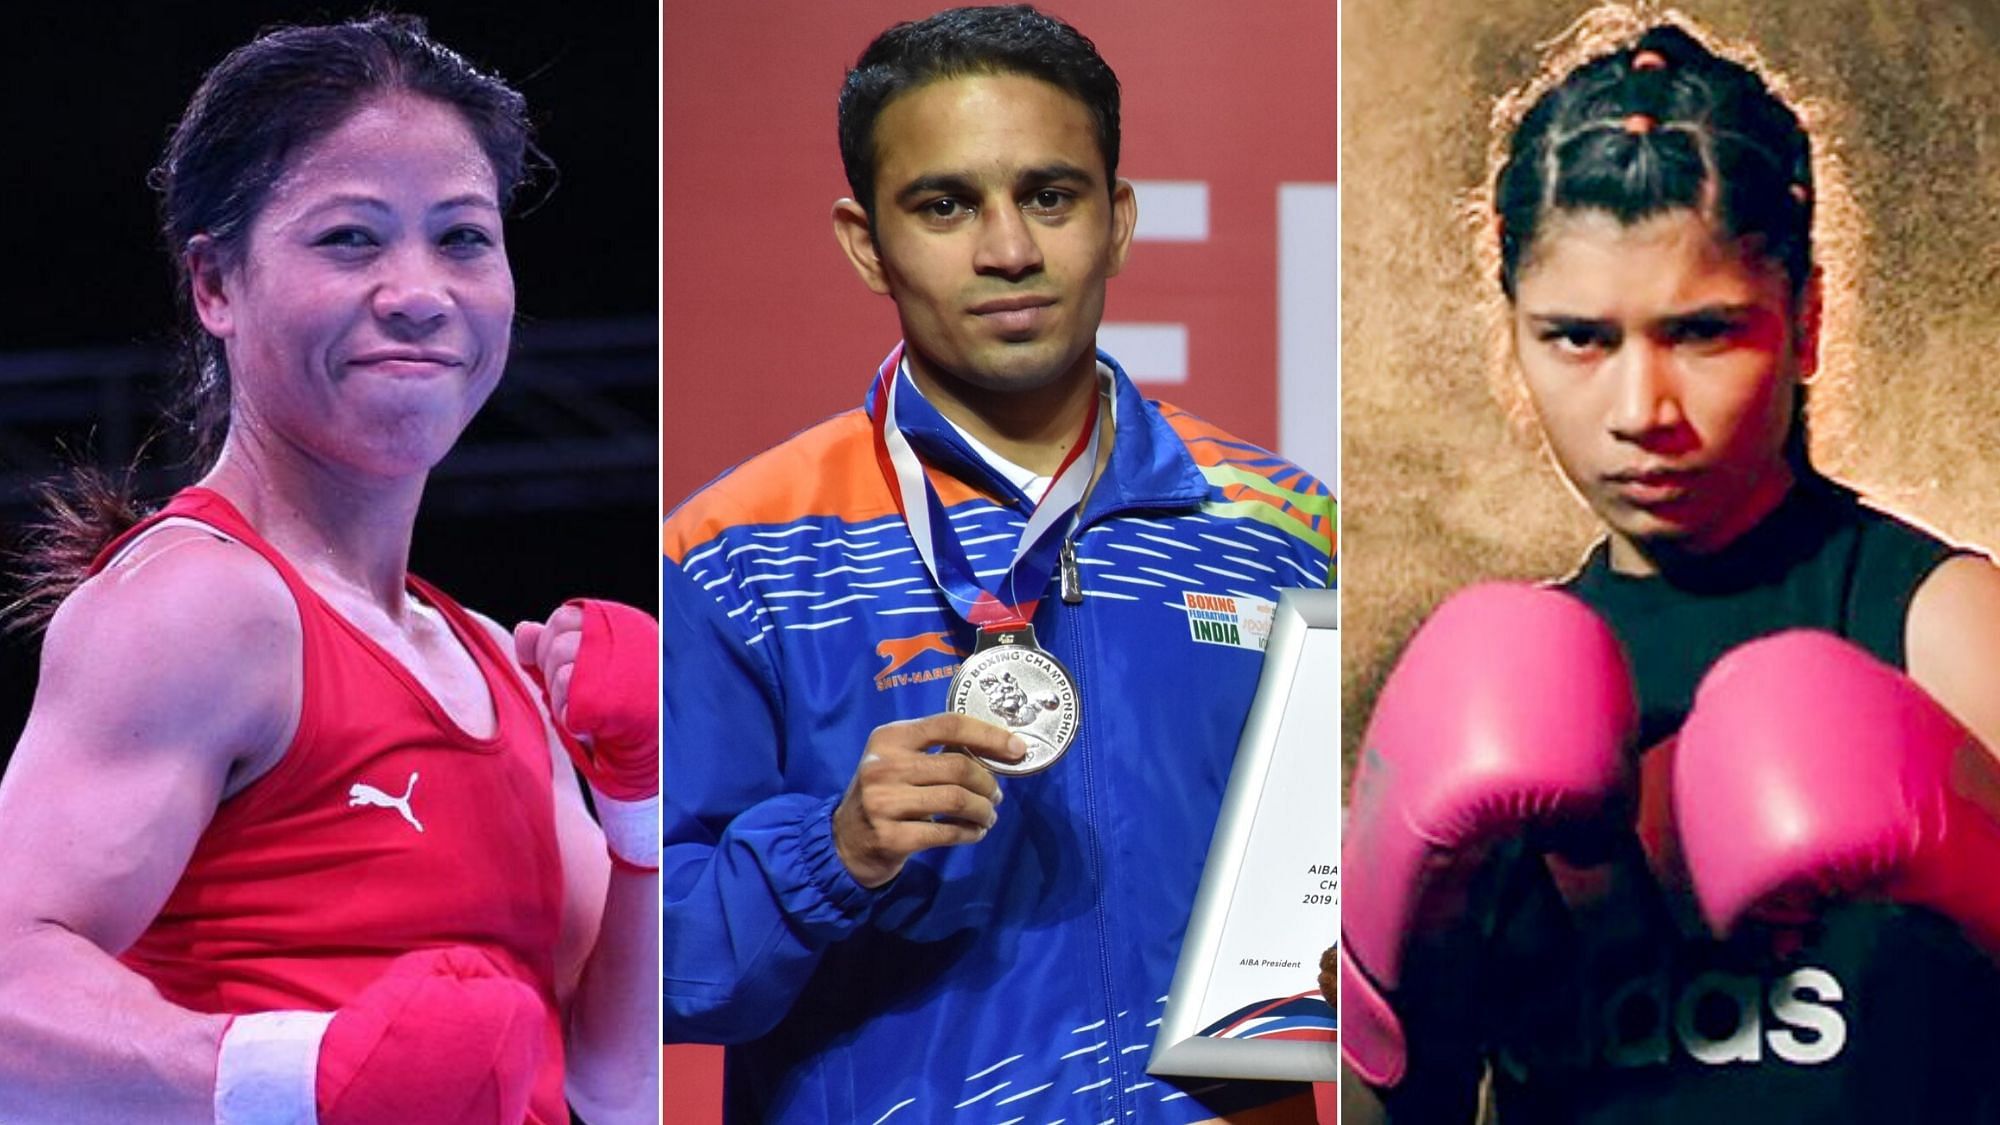  Indian boxing was all this and much more in an action-packed year dominated by pint-sized dynamo Amit Panghal.